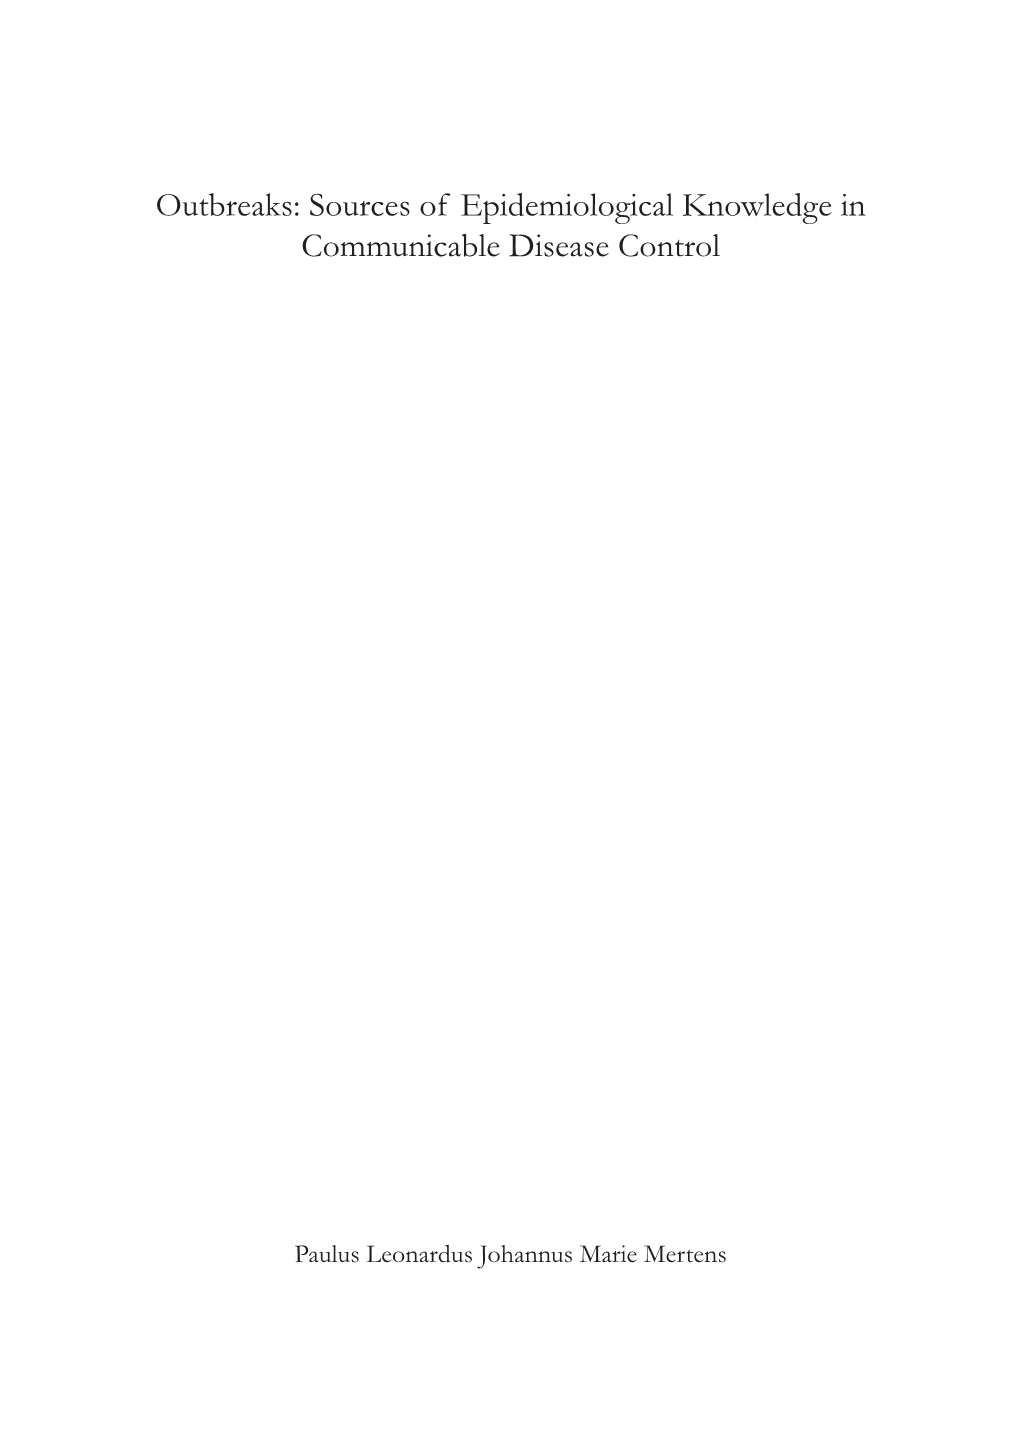 Sources of Epidemiological Knowledge in Communicable Disease Control